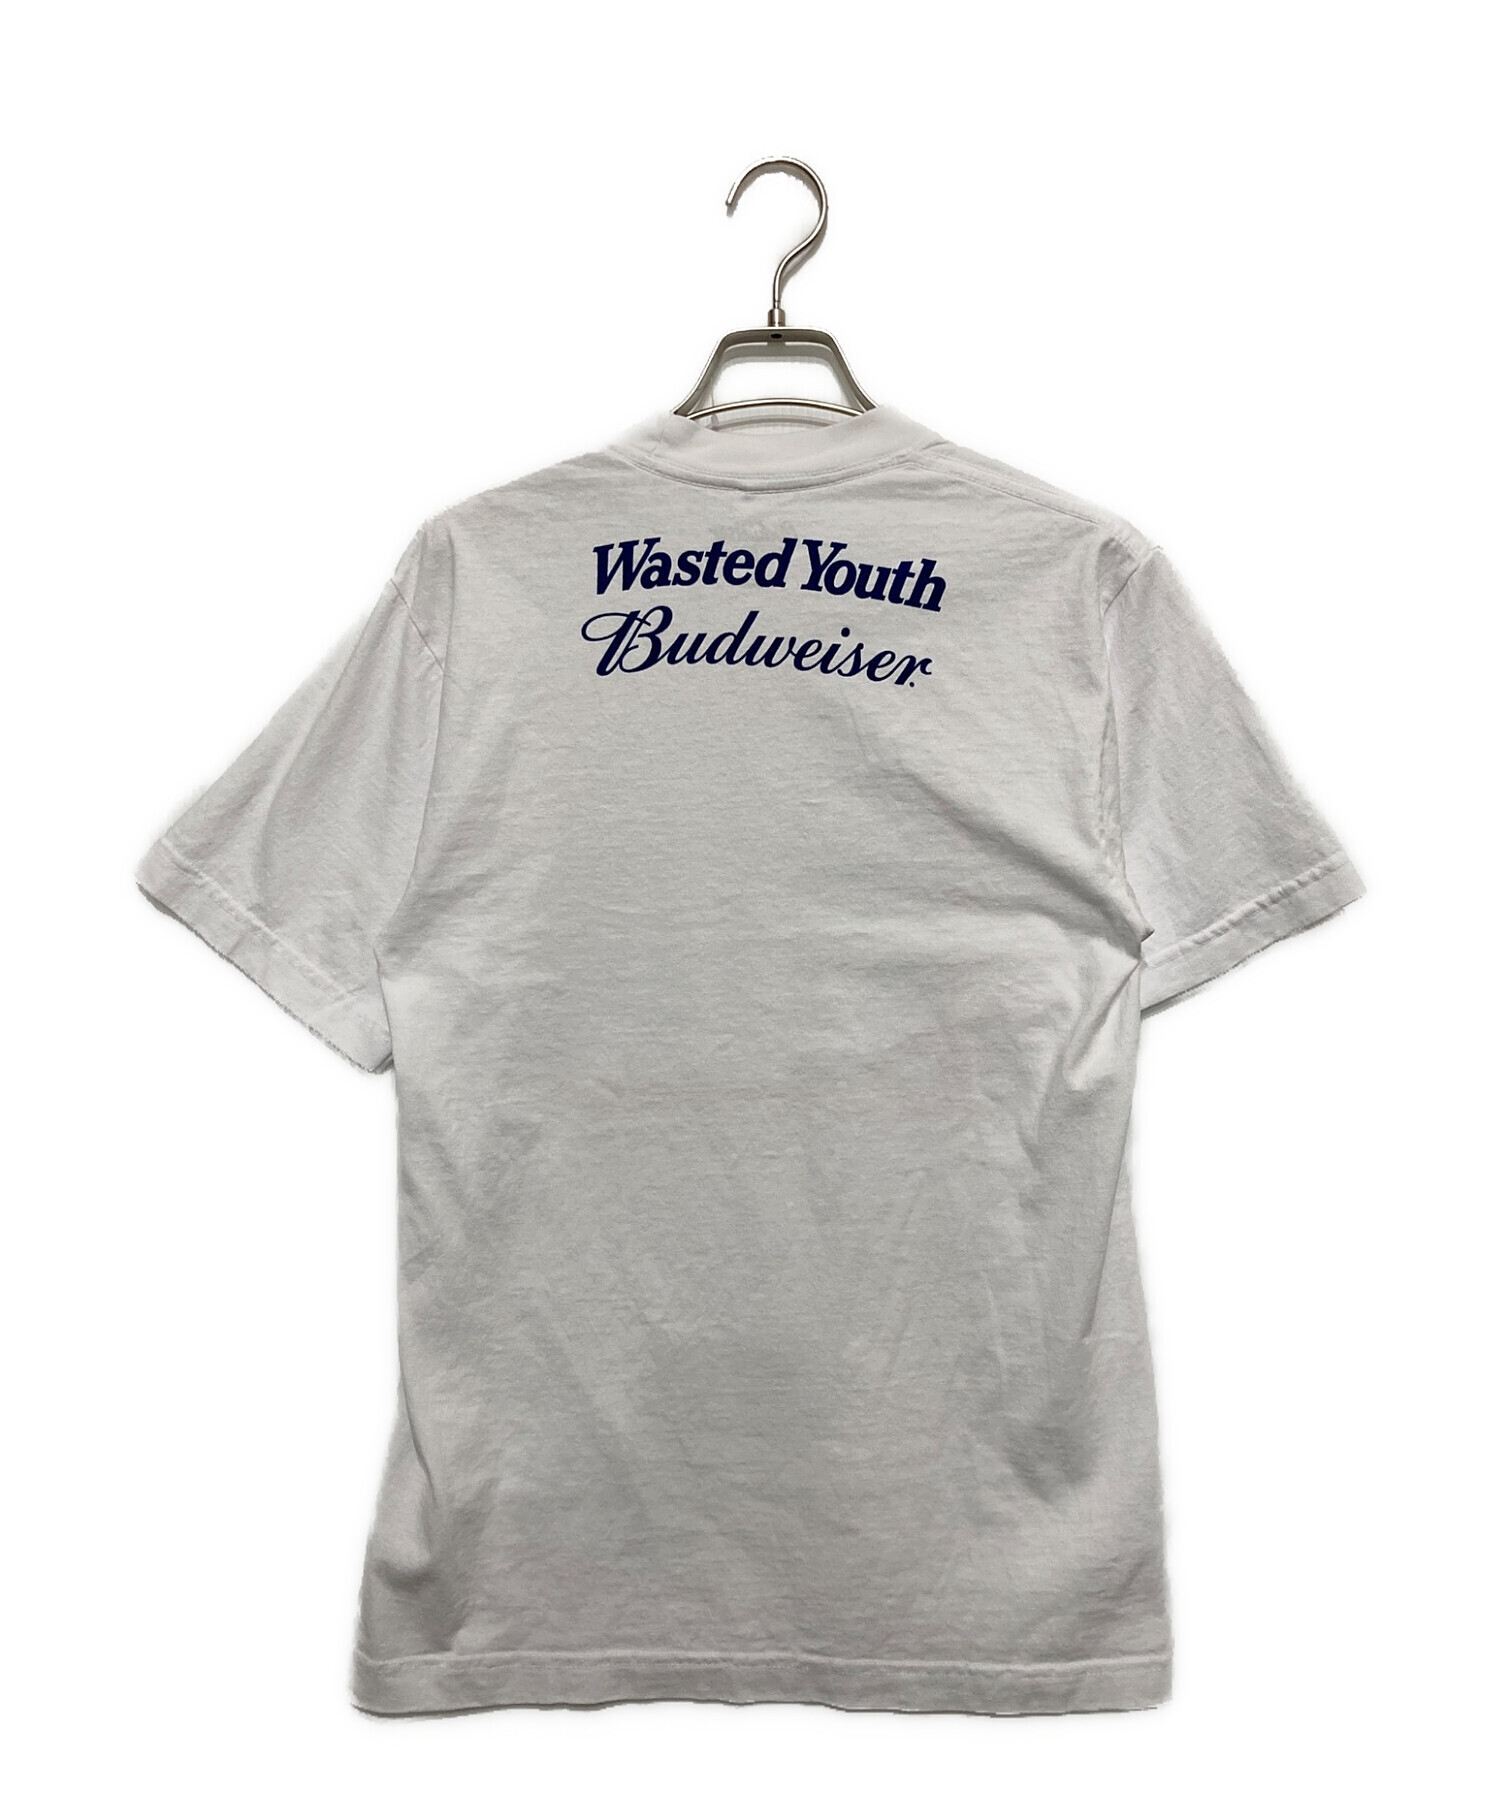 verdy Wasted Youth TシャツBudweiser ボックス付き値下げは受付ます